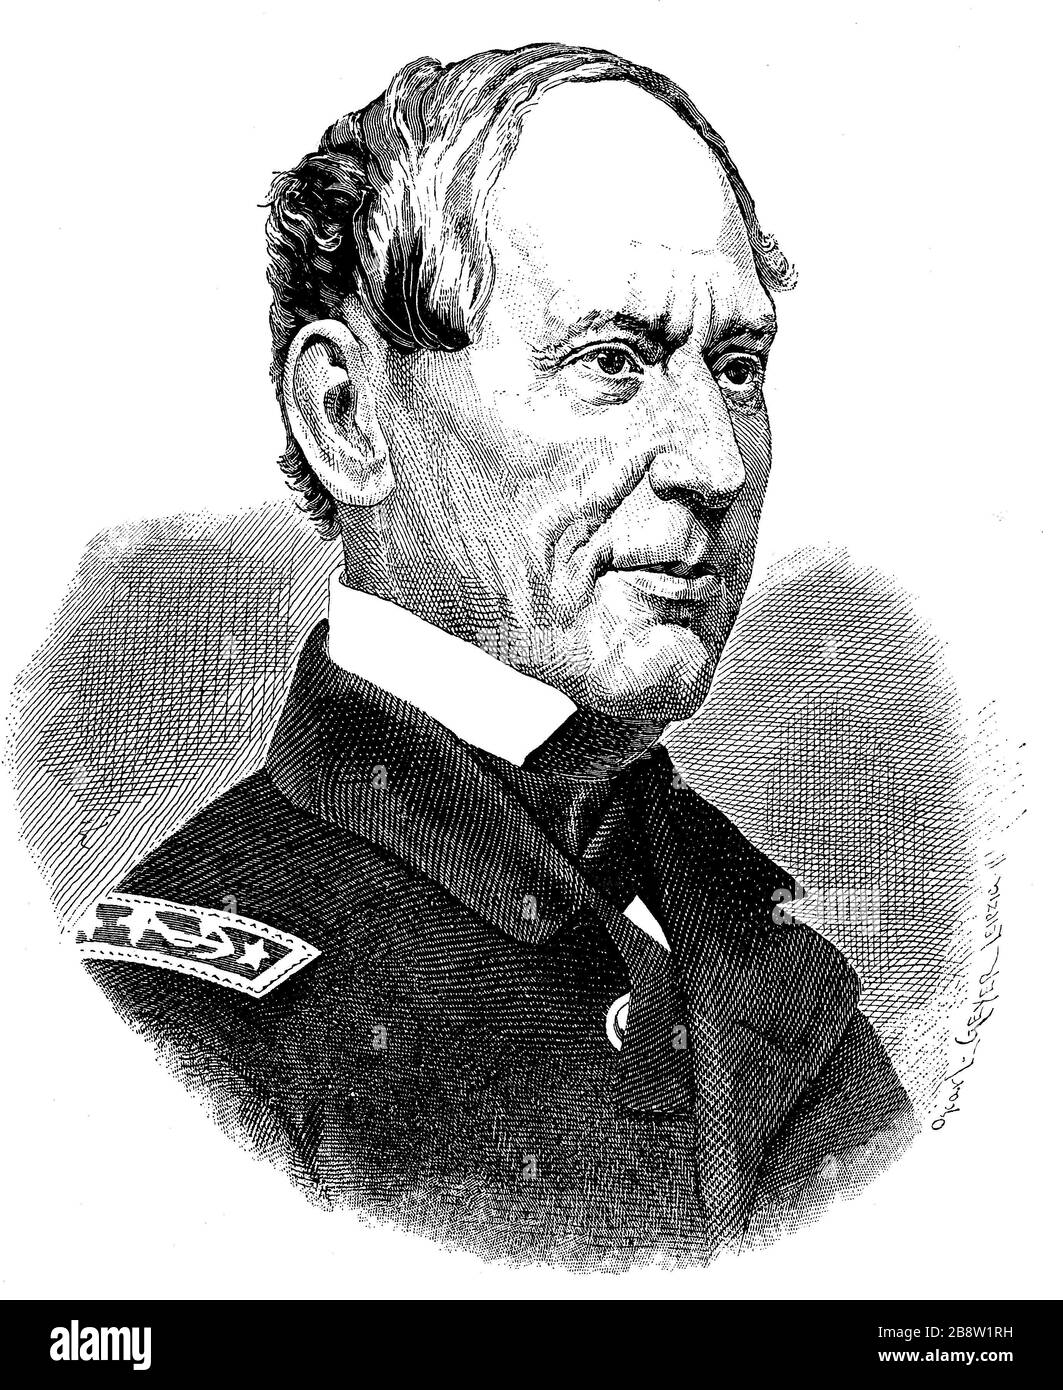 David Glasgow Farragut, 5 July 1801 - 14 August 1870, was one of the most famous US naval officers of the 19th century  /  David Glasgow Farragut, 5. Juli 1801 - 14. August 1870, war einer der bekanntesten US-amerikanischen Marineoffiziere des 19. Jahrhunderts, Historisch, digital improved reproduction of an original from the 19th century / digitale Reproduktion einer Originalvorlage aus dem 19. Jahrhundert, Stock Photo